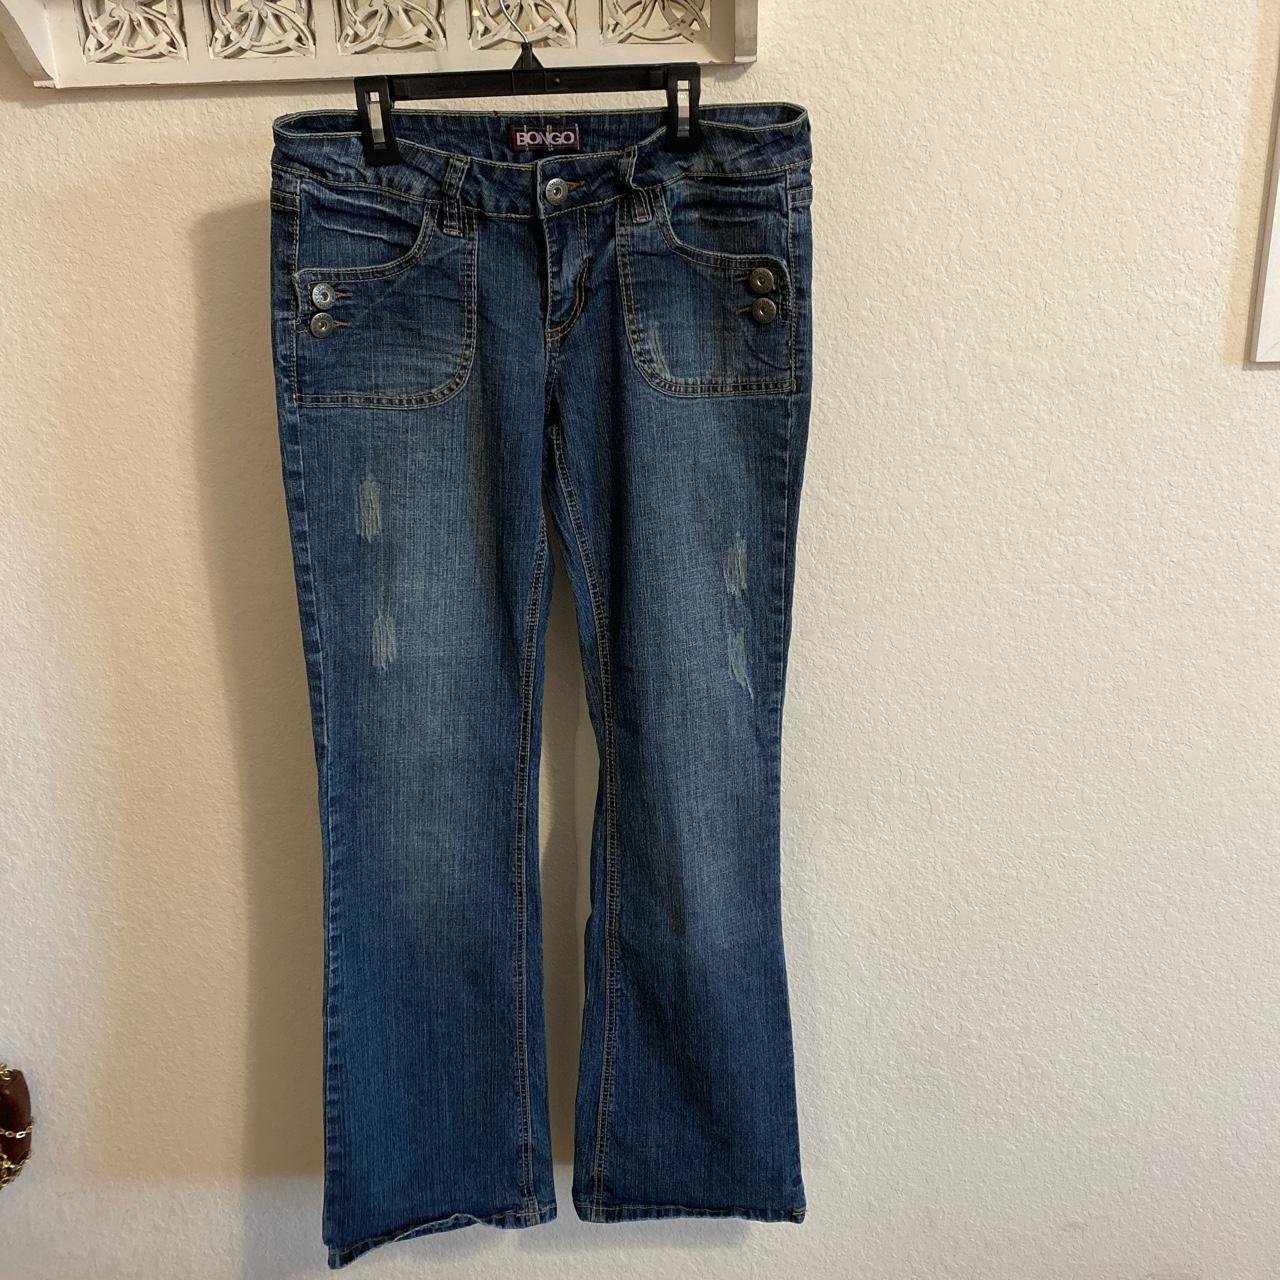 Bongo low rise jeans with cute button details and... - Depop